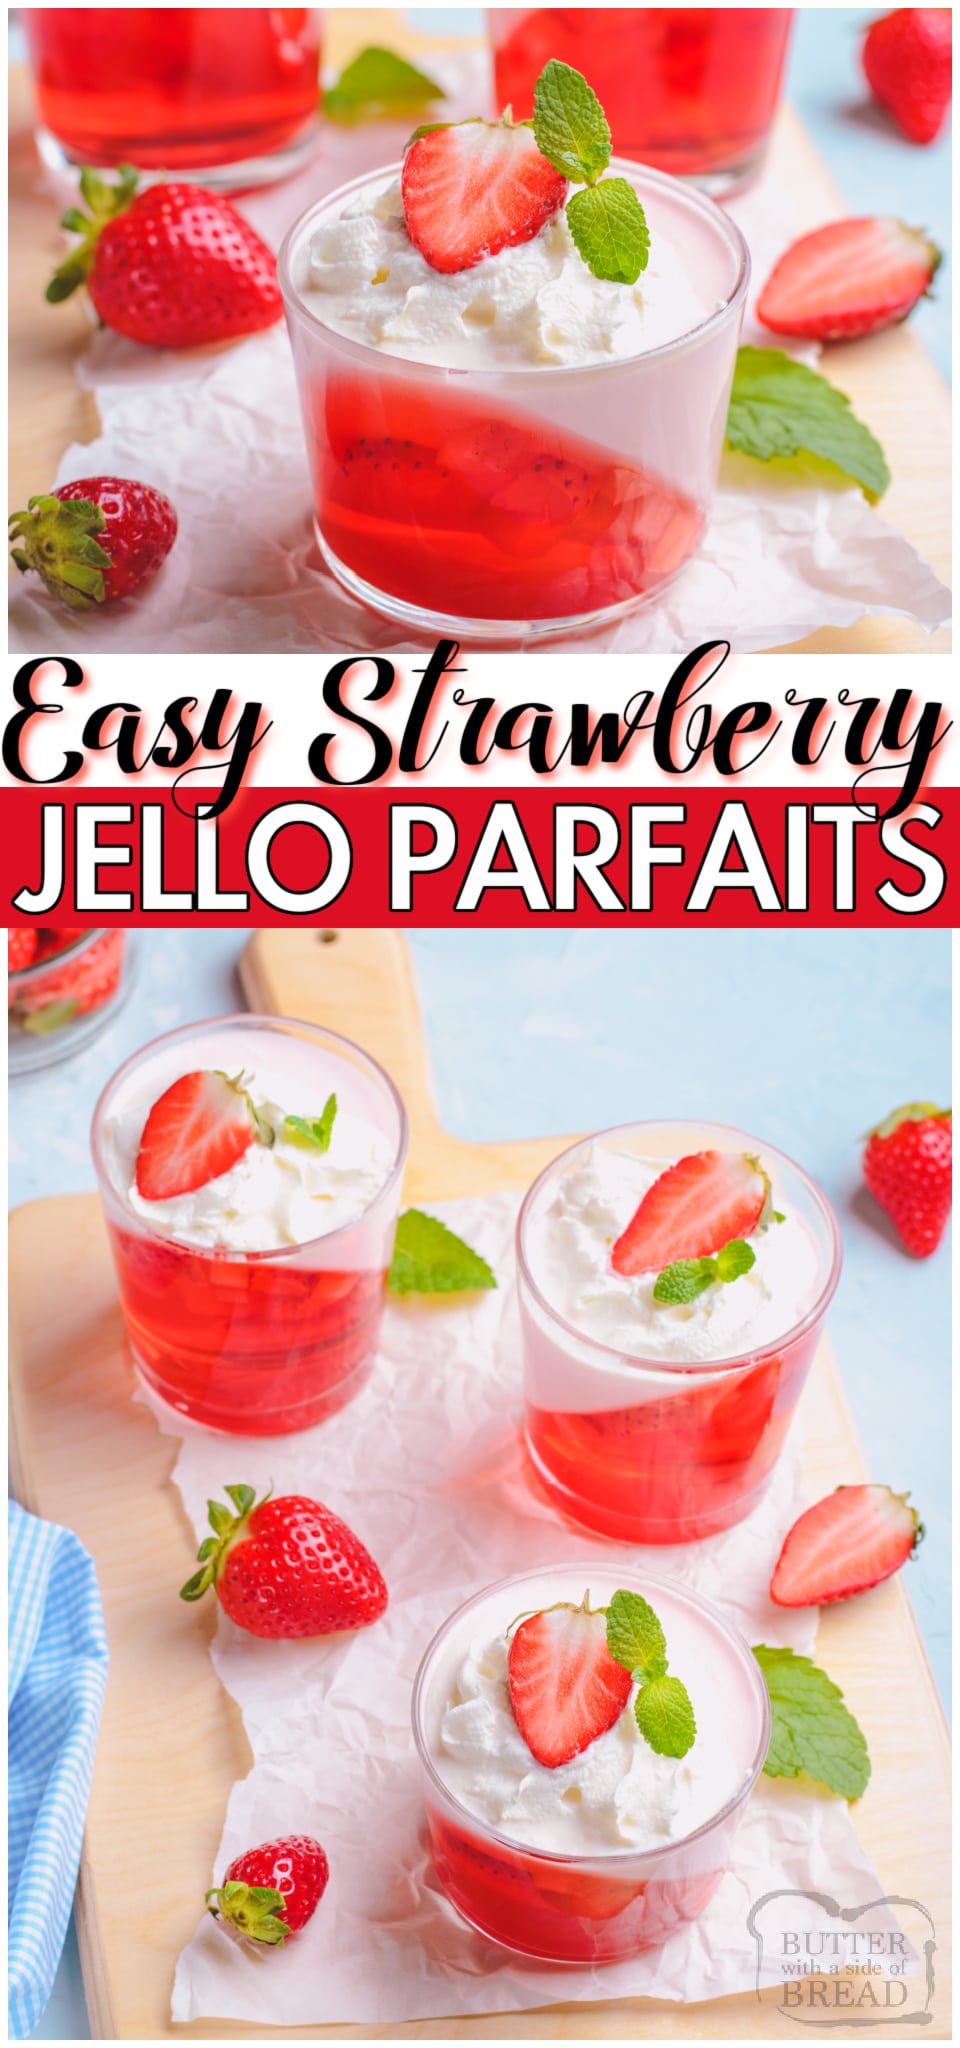 Pretty Strawberry Jello Parfaits made easy with just 3 ingredients! Strawberries, jello & whipped cream combine for a simple, elegant dessert. Fun & festive Jello recipe perfect for Valentine's Day or any occasion! 